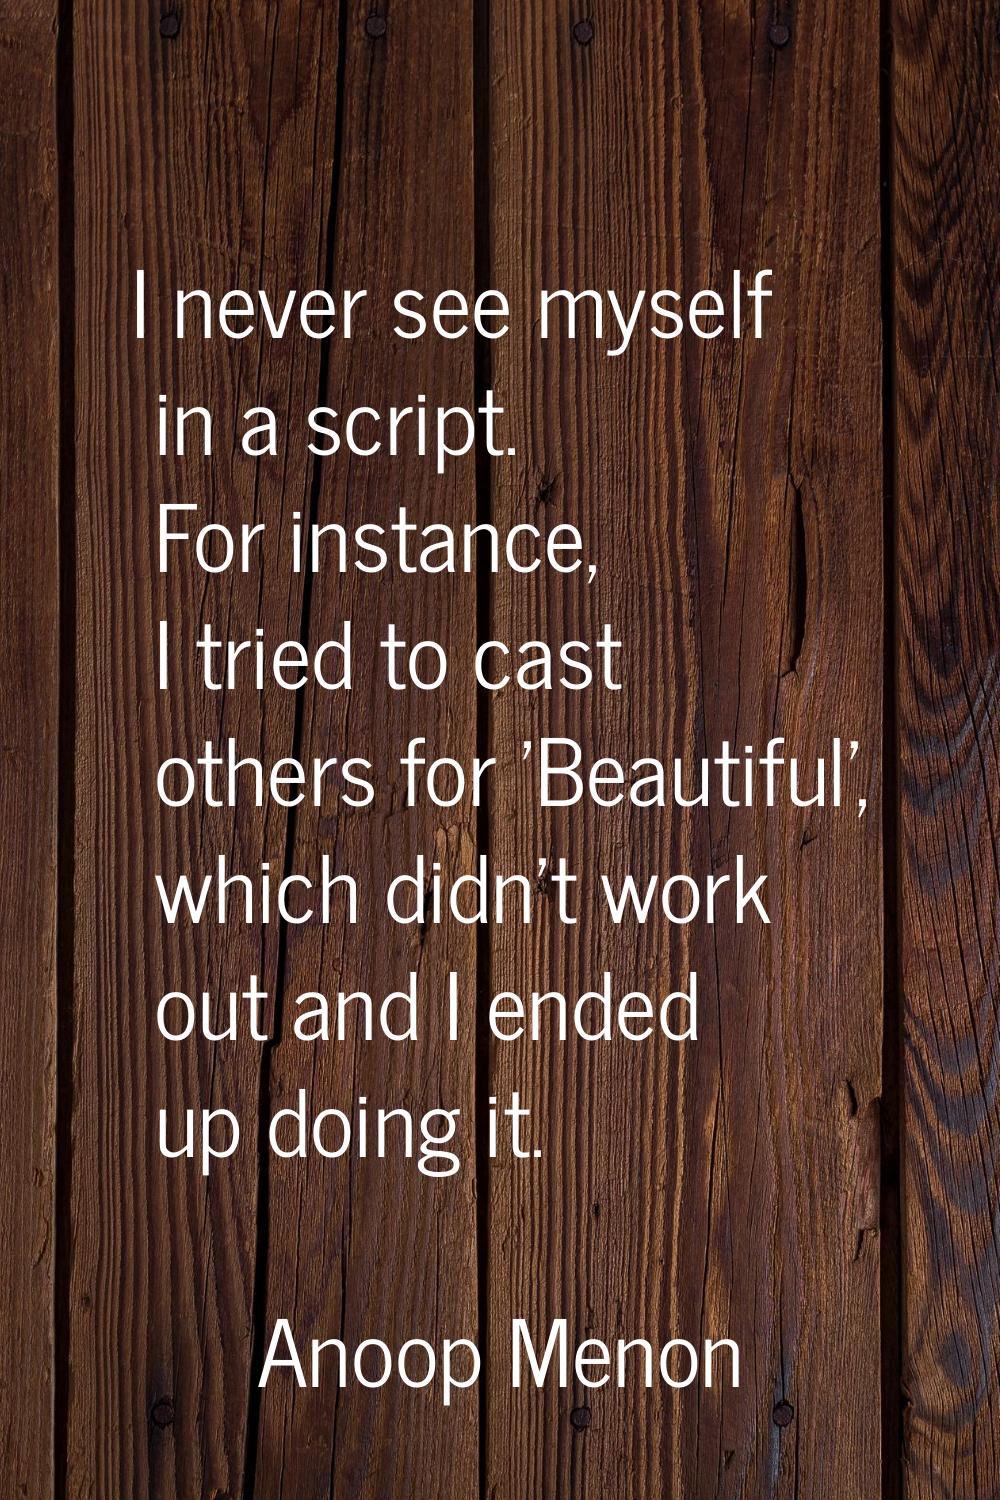 I never see myself in a script. For instance, I tried to cast others for 'Beautiful', which didn't 